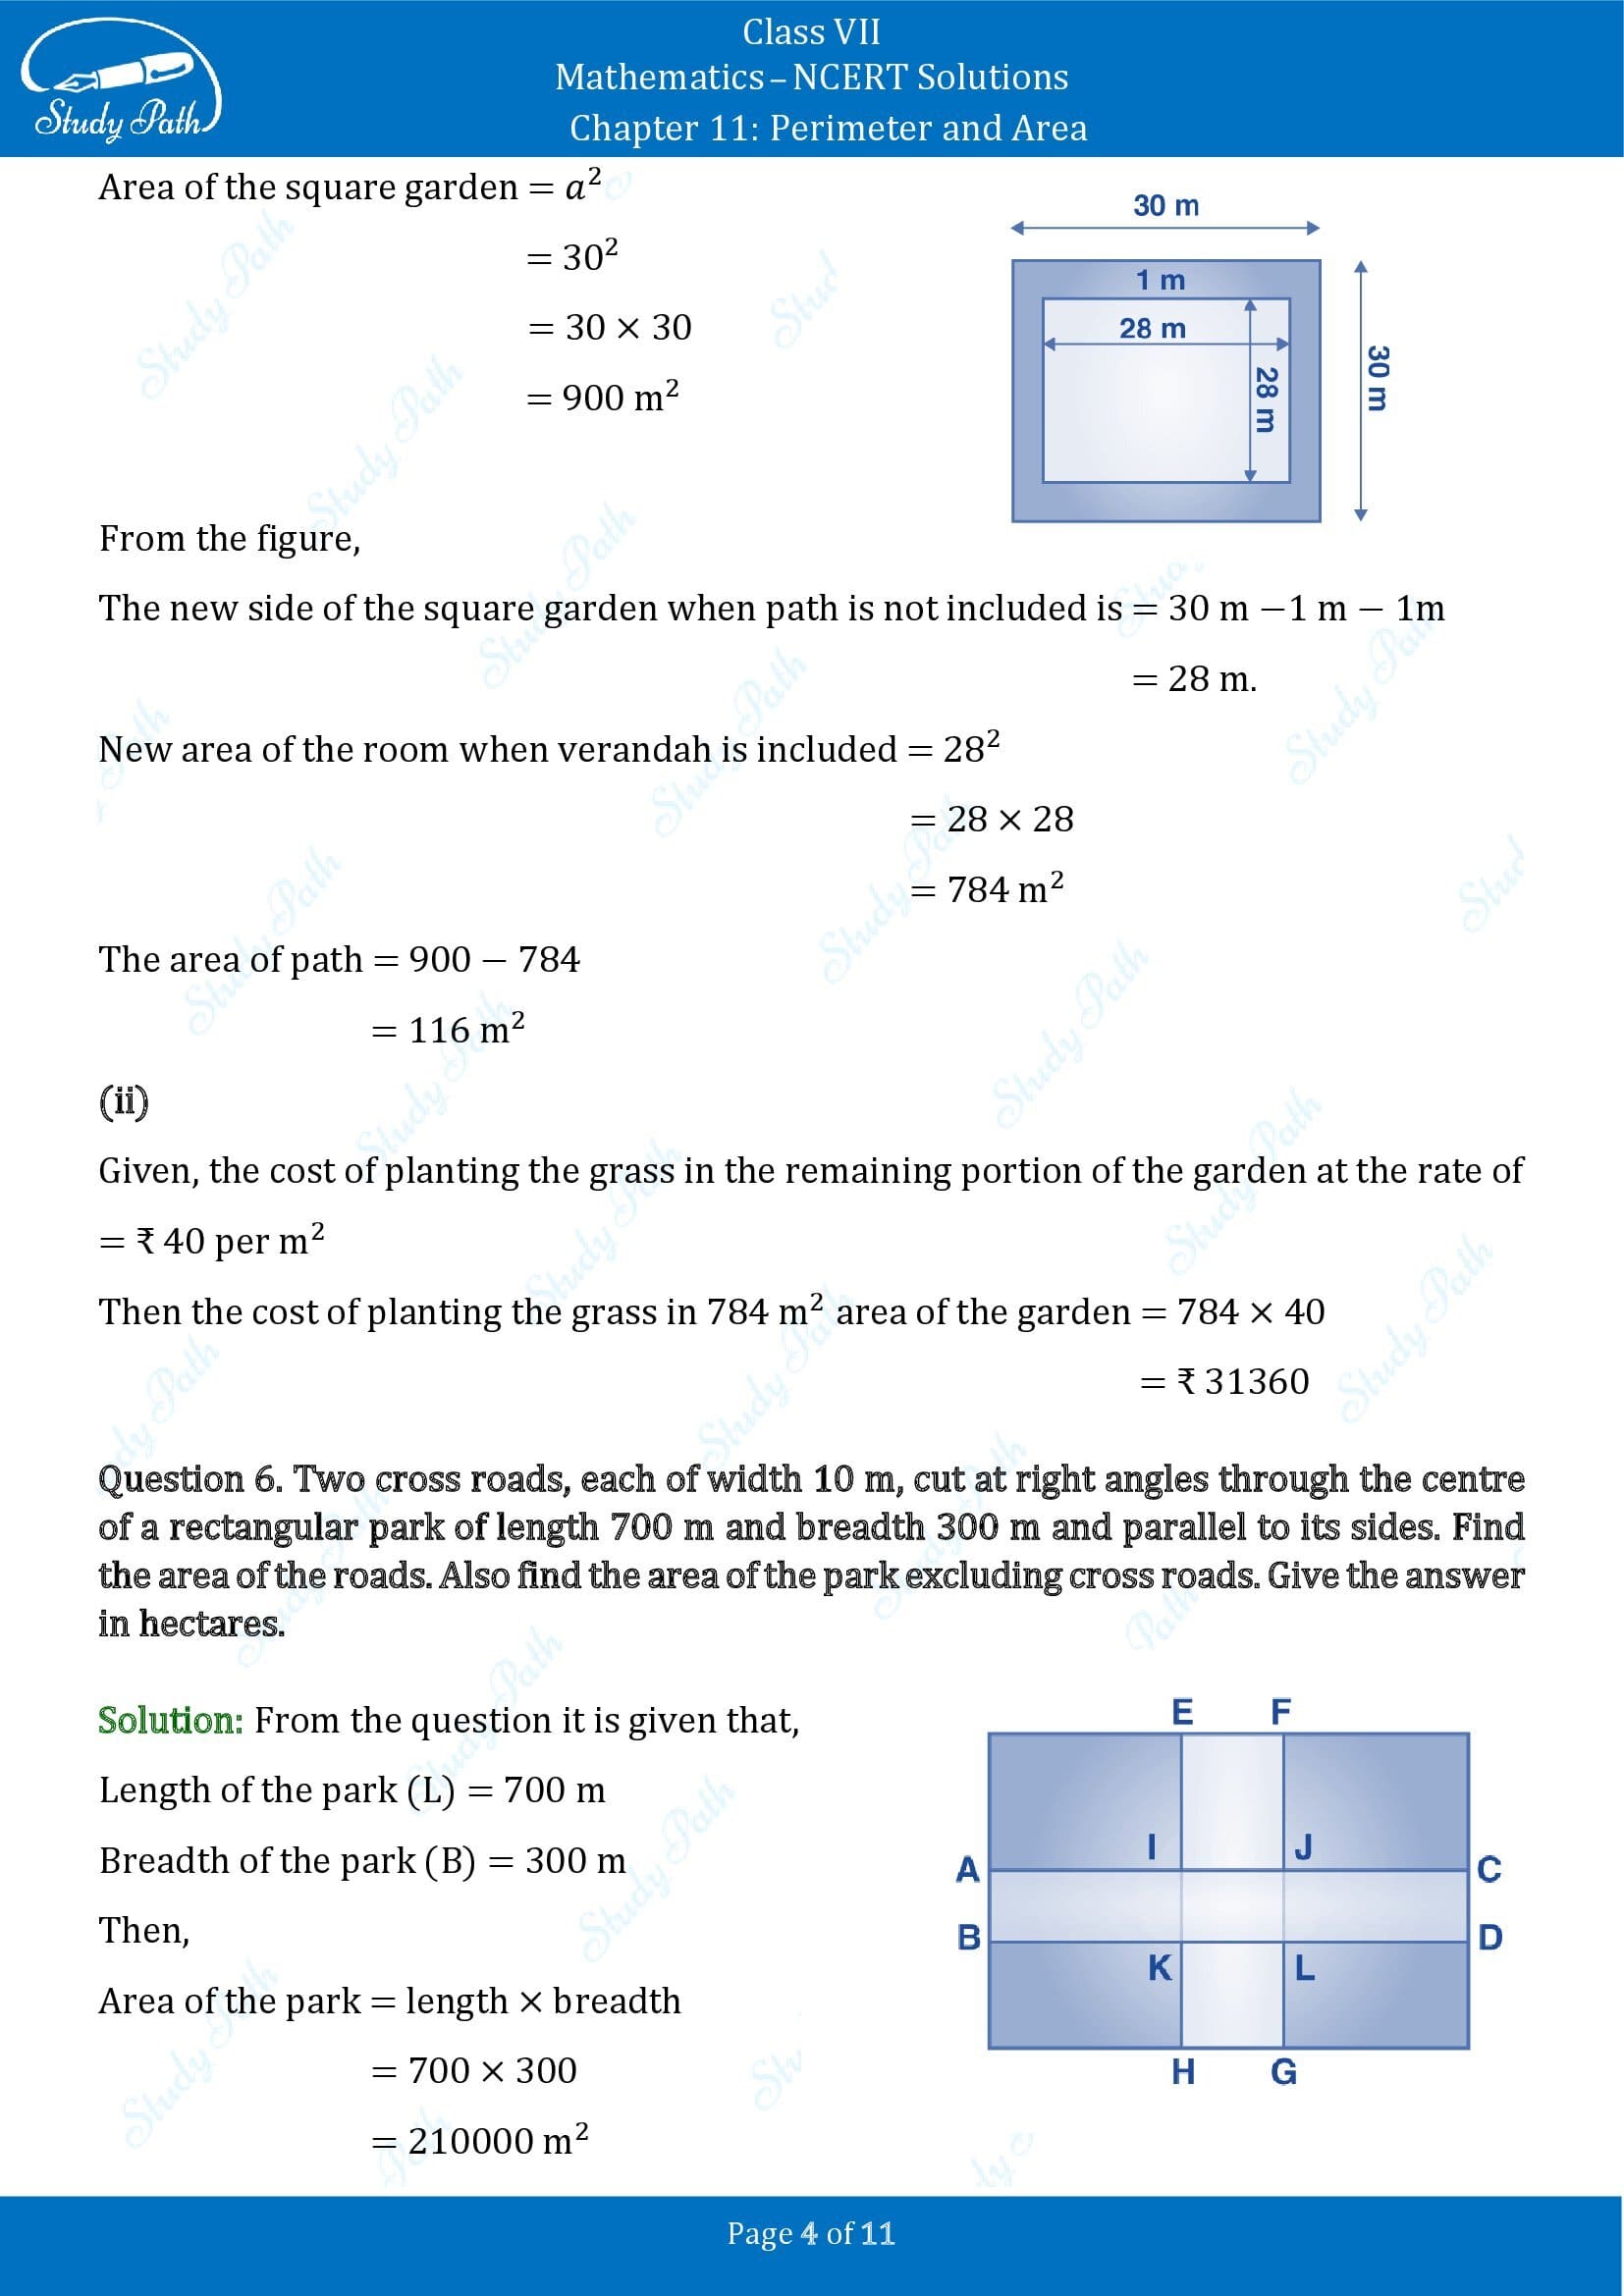 NCERT Solutions for Class 7 Maths Chapter 11 Perimeter and Area Exercise 11.4 00004